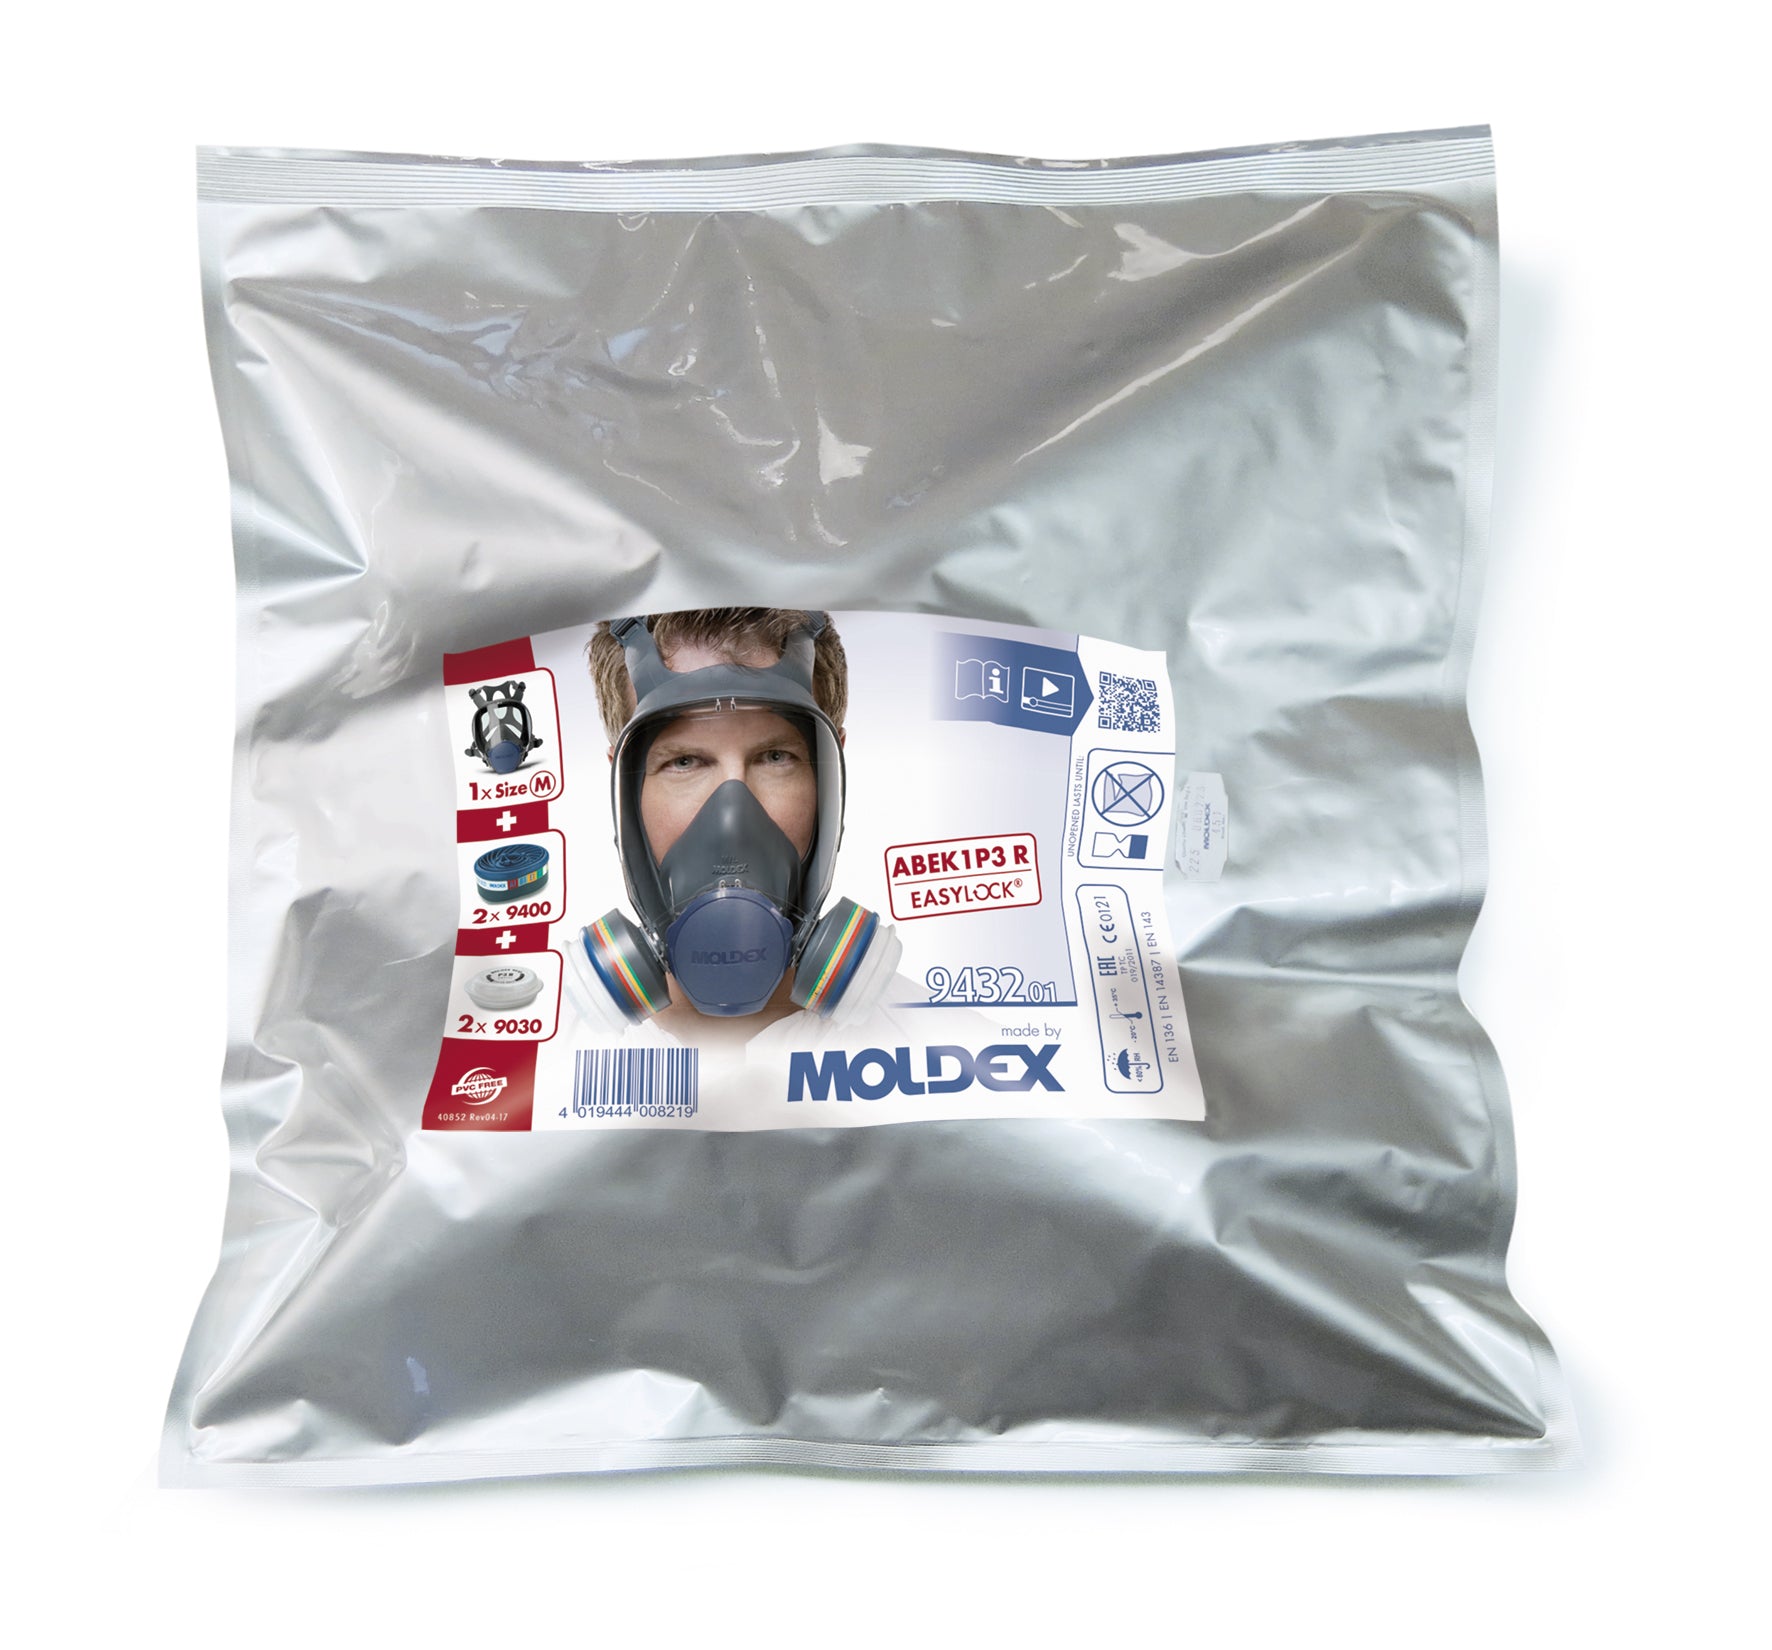 Moldex 9000 Series Pre-assembled Full Face Mask ABEKP3 (Size M) - DaltonSafety